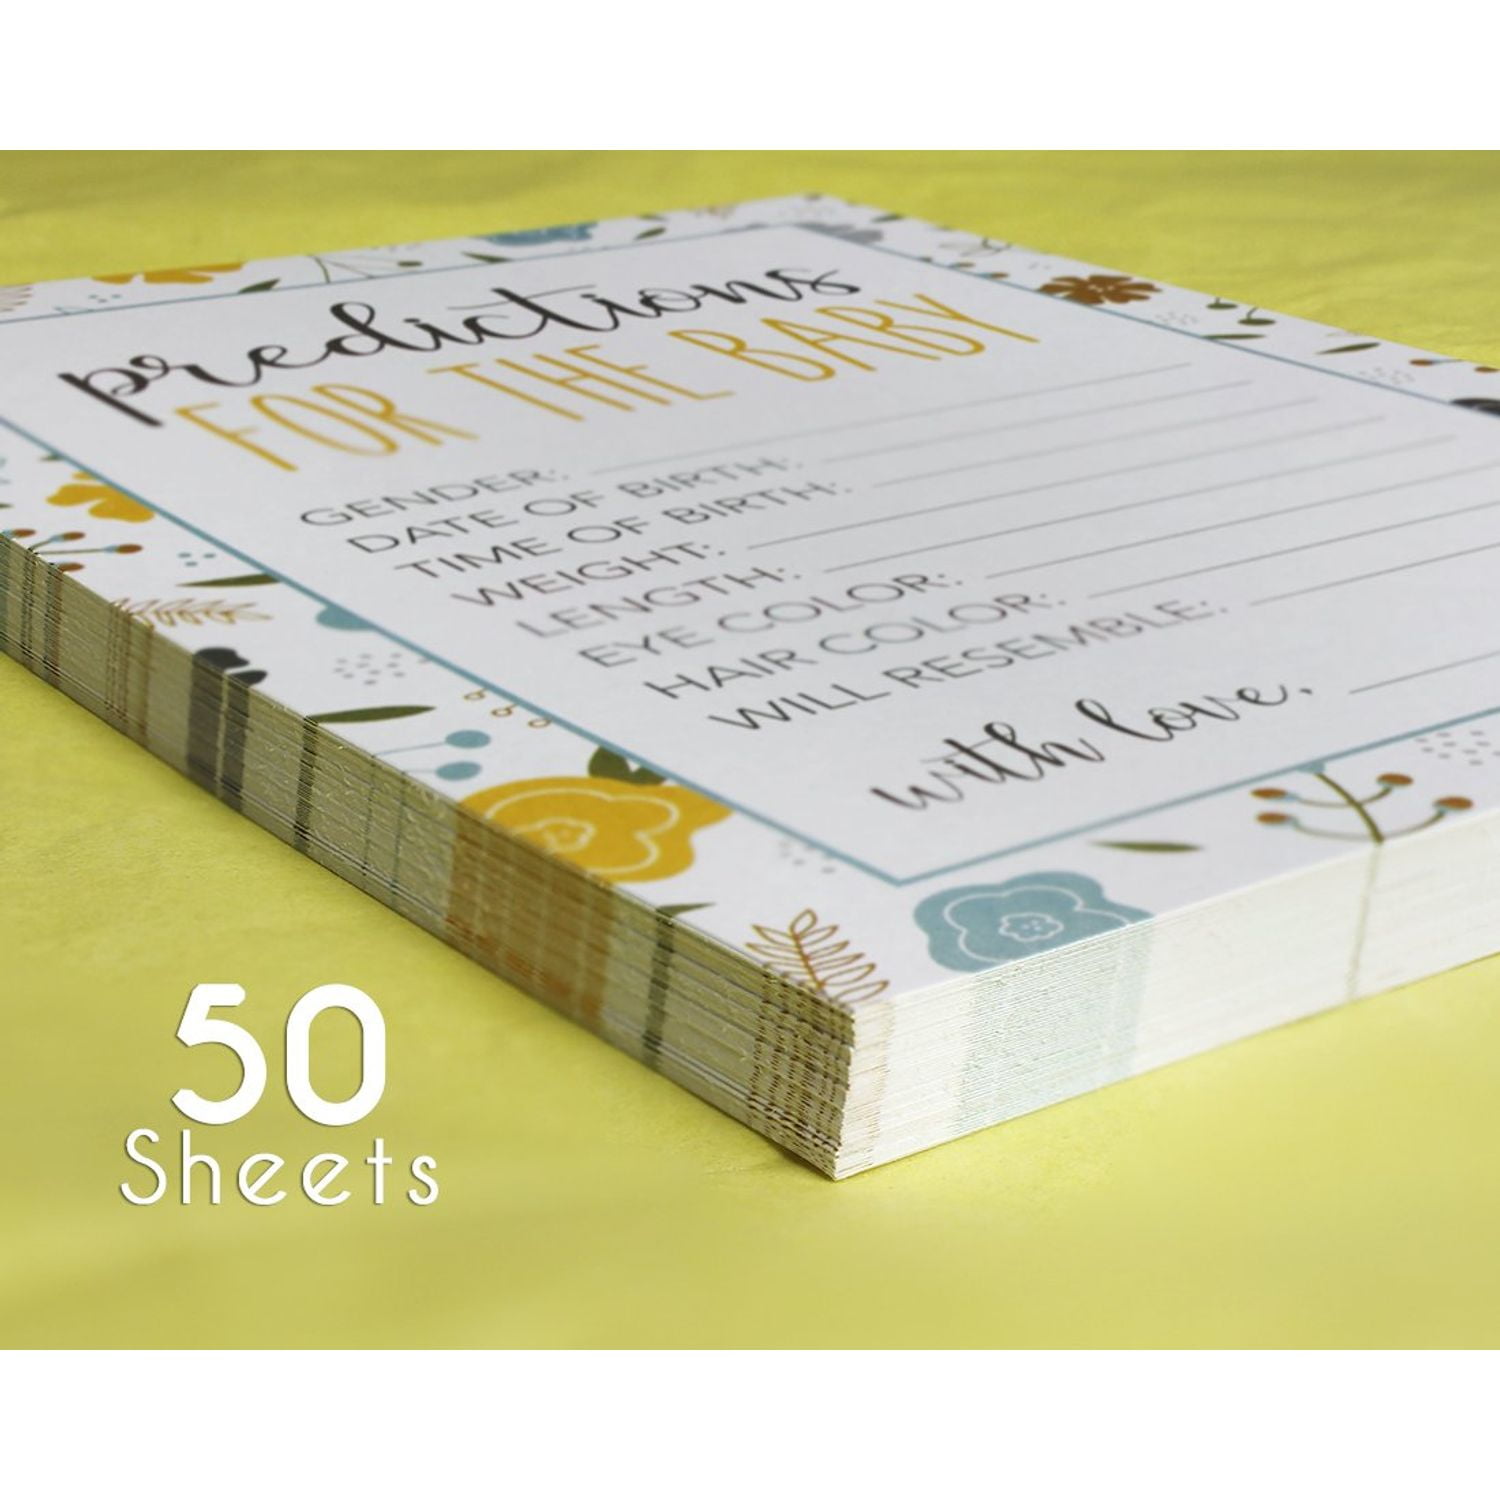 50 Sheets Baby Shower Predictions for the Baby Party Games for Boy or Girl Unisex Gender Neutral 5 x 7 Inches Best Paper Greetings for 50 Guest Activities Supplies